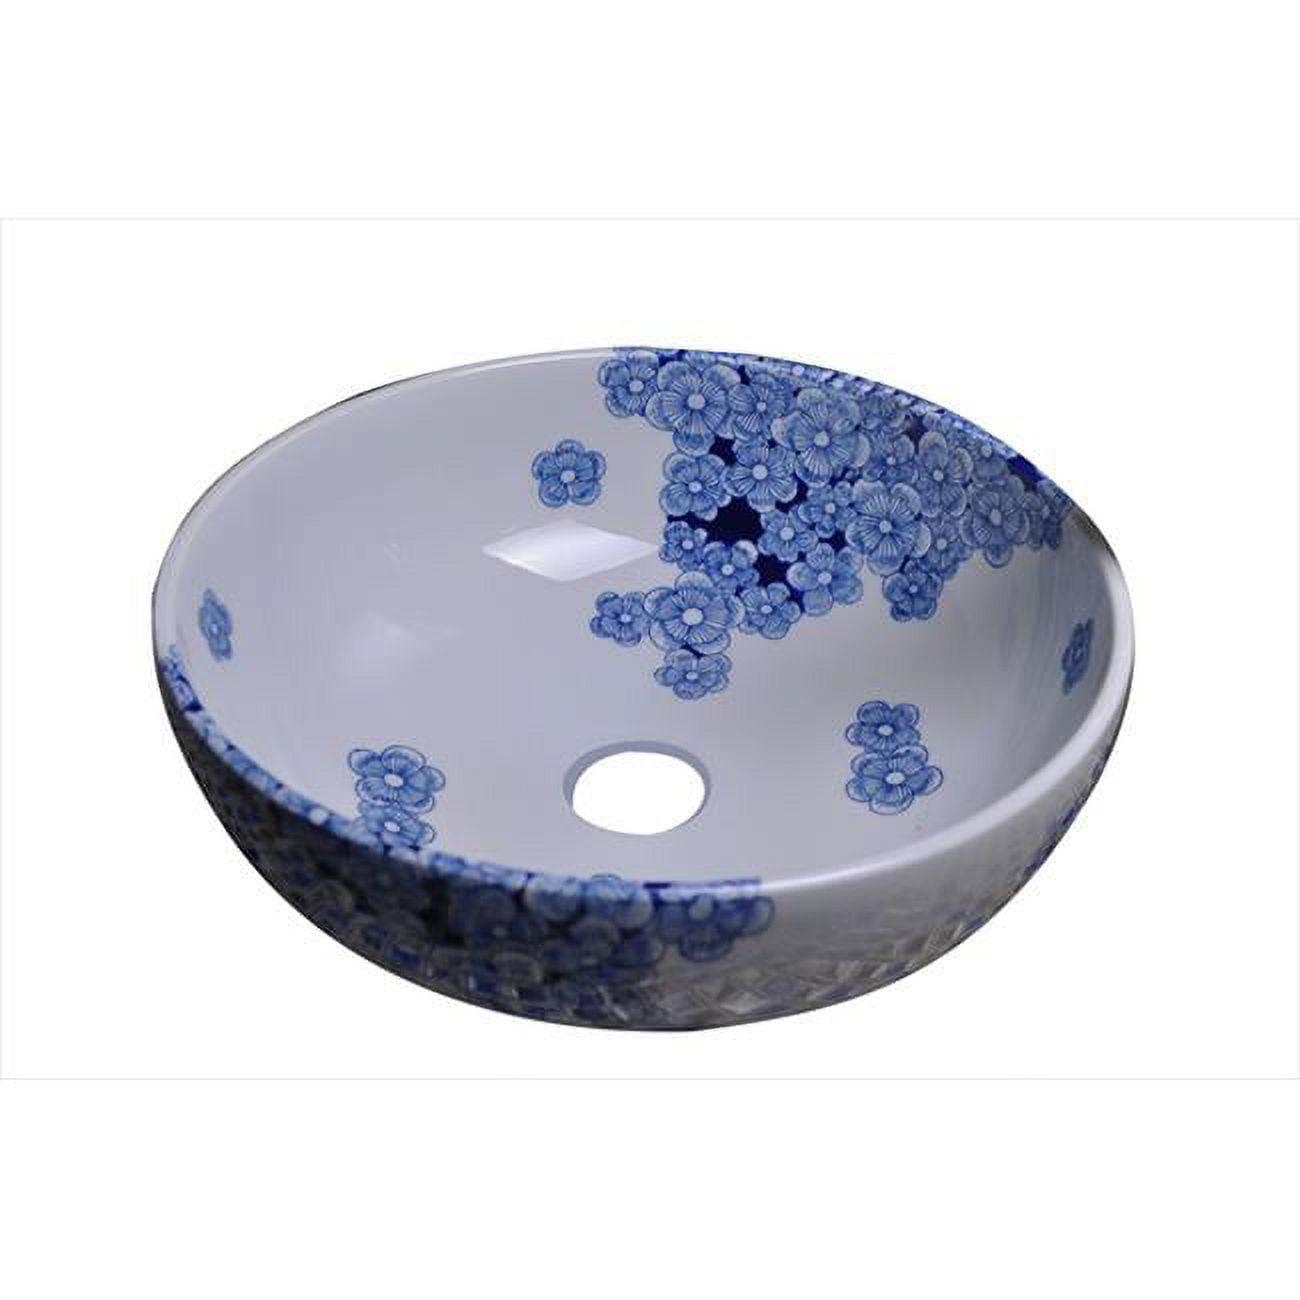 Elegant Blue and White Hand-Painted Ceramic Vessel Sink 16.25"